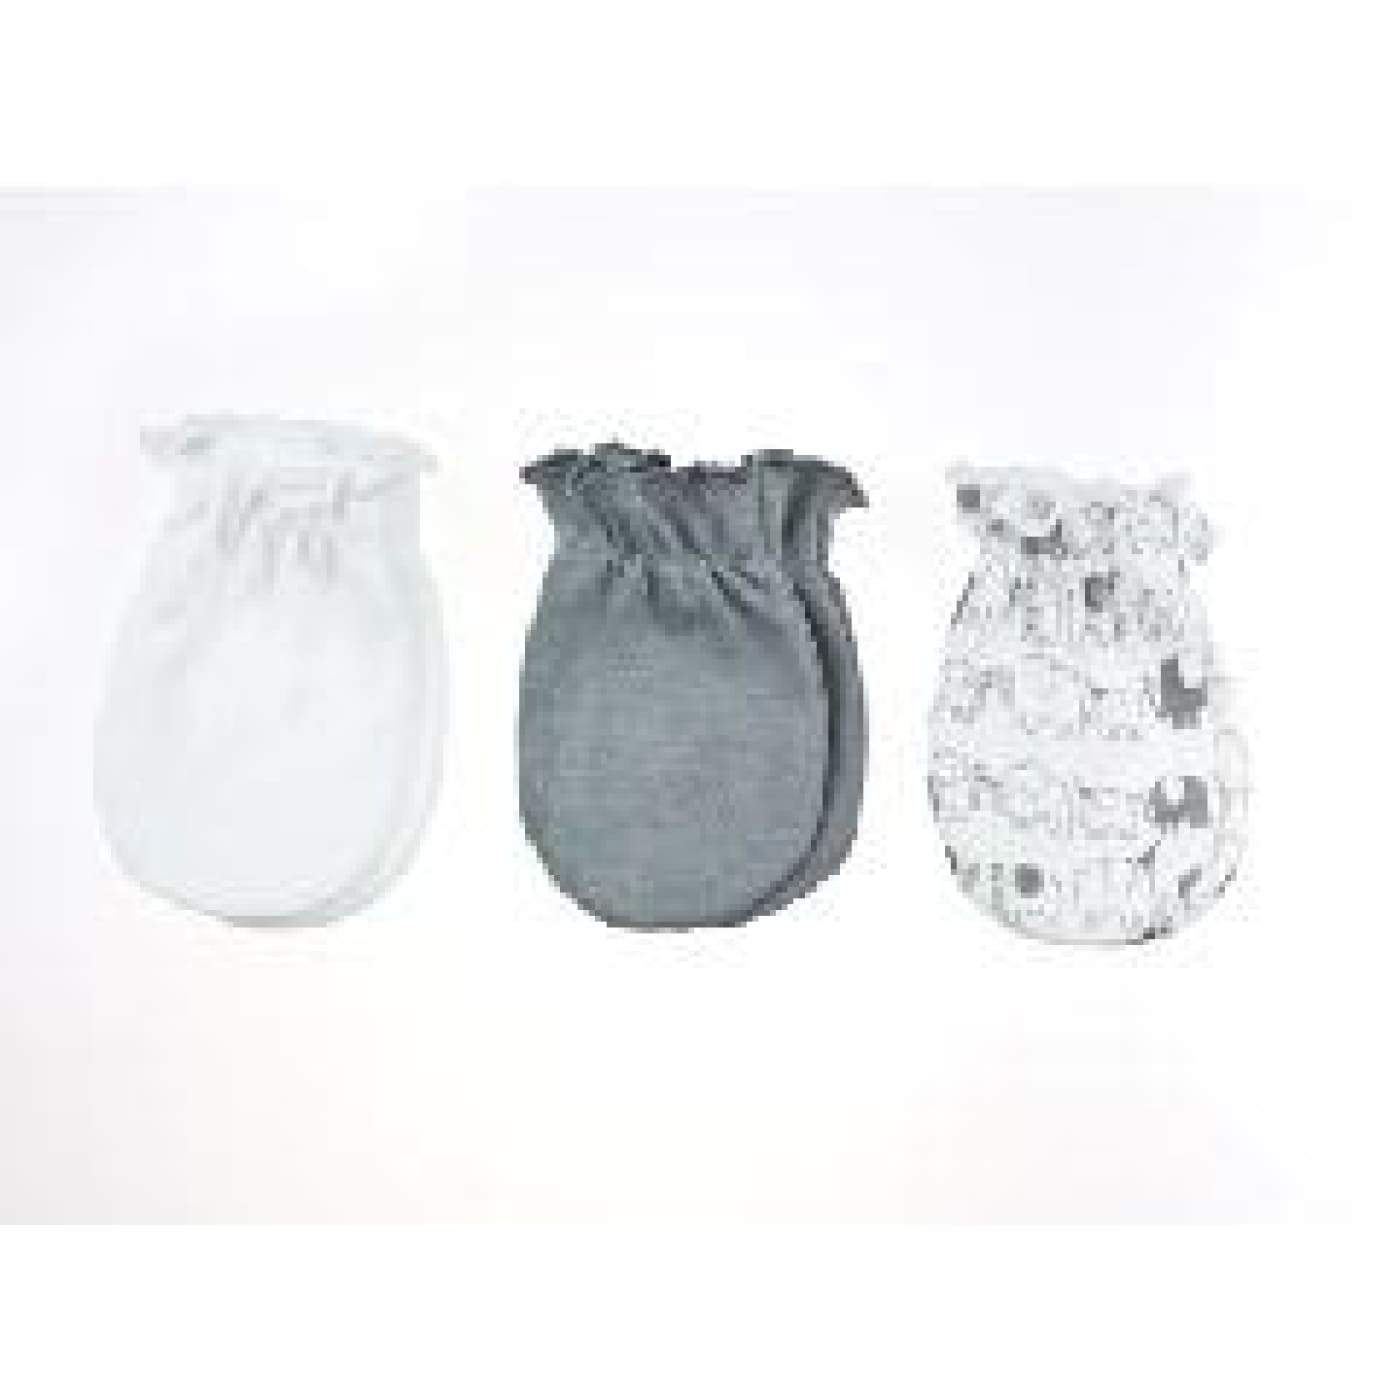 Playette Mittens - Elephant/Grey/White 0-6M 3PK - BABY & TODDLER CLOTHING - MITTENS/SOCKS/SHOES